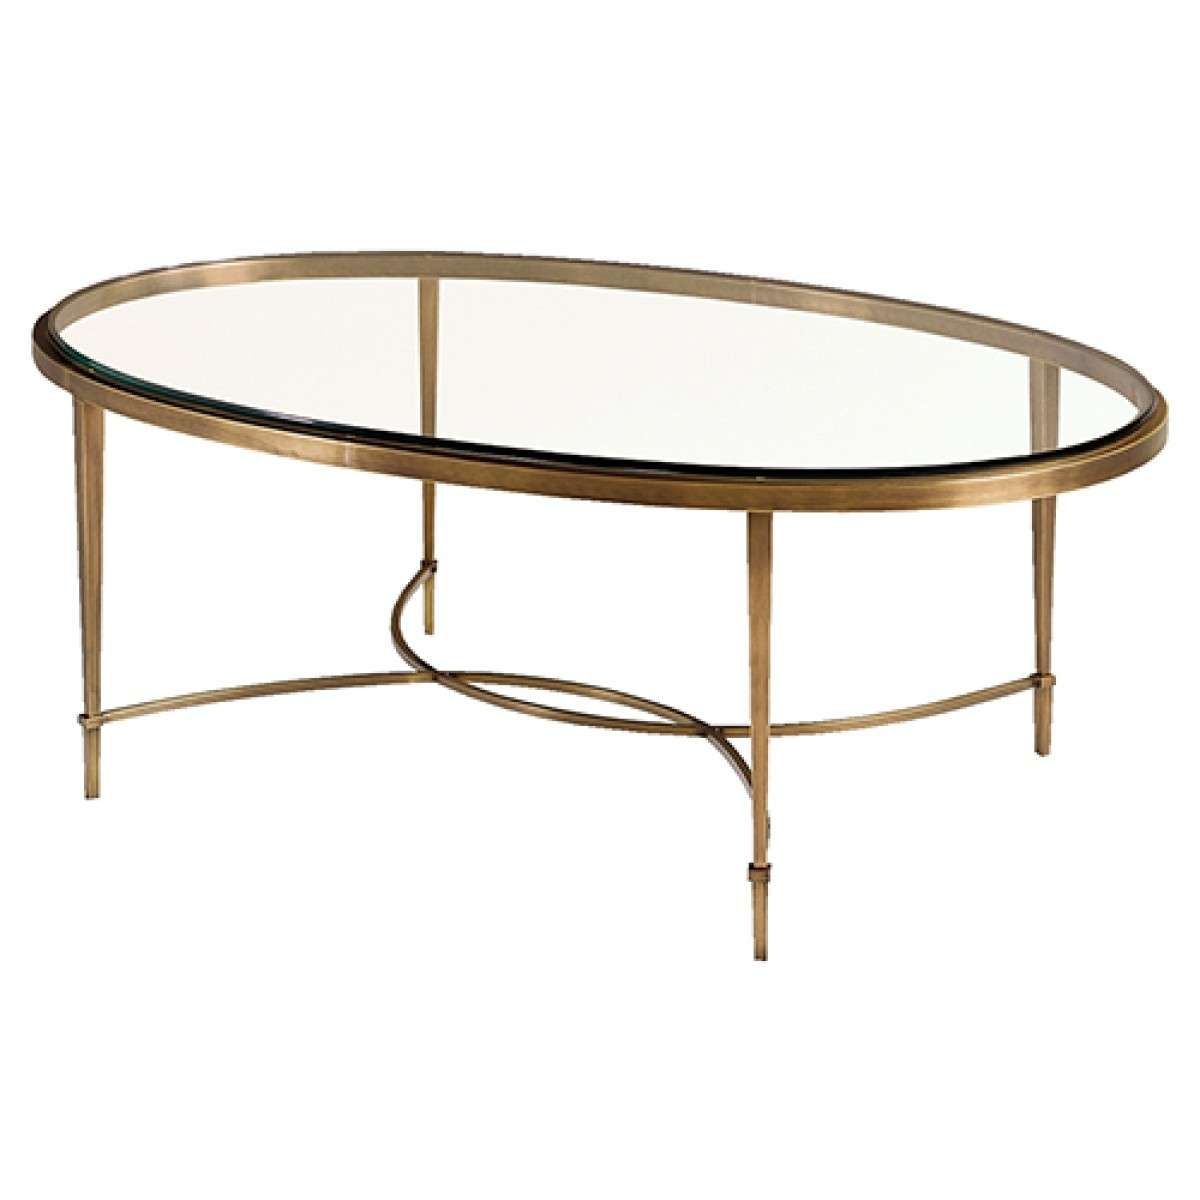 Well Known Antique Glass Coffee Tables Within Coffee Tables : Mesmerizing Antique And Minimalist Oval Coffee (View 17 of 20)